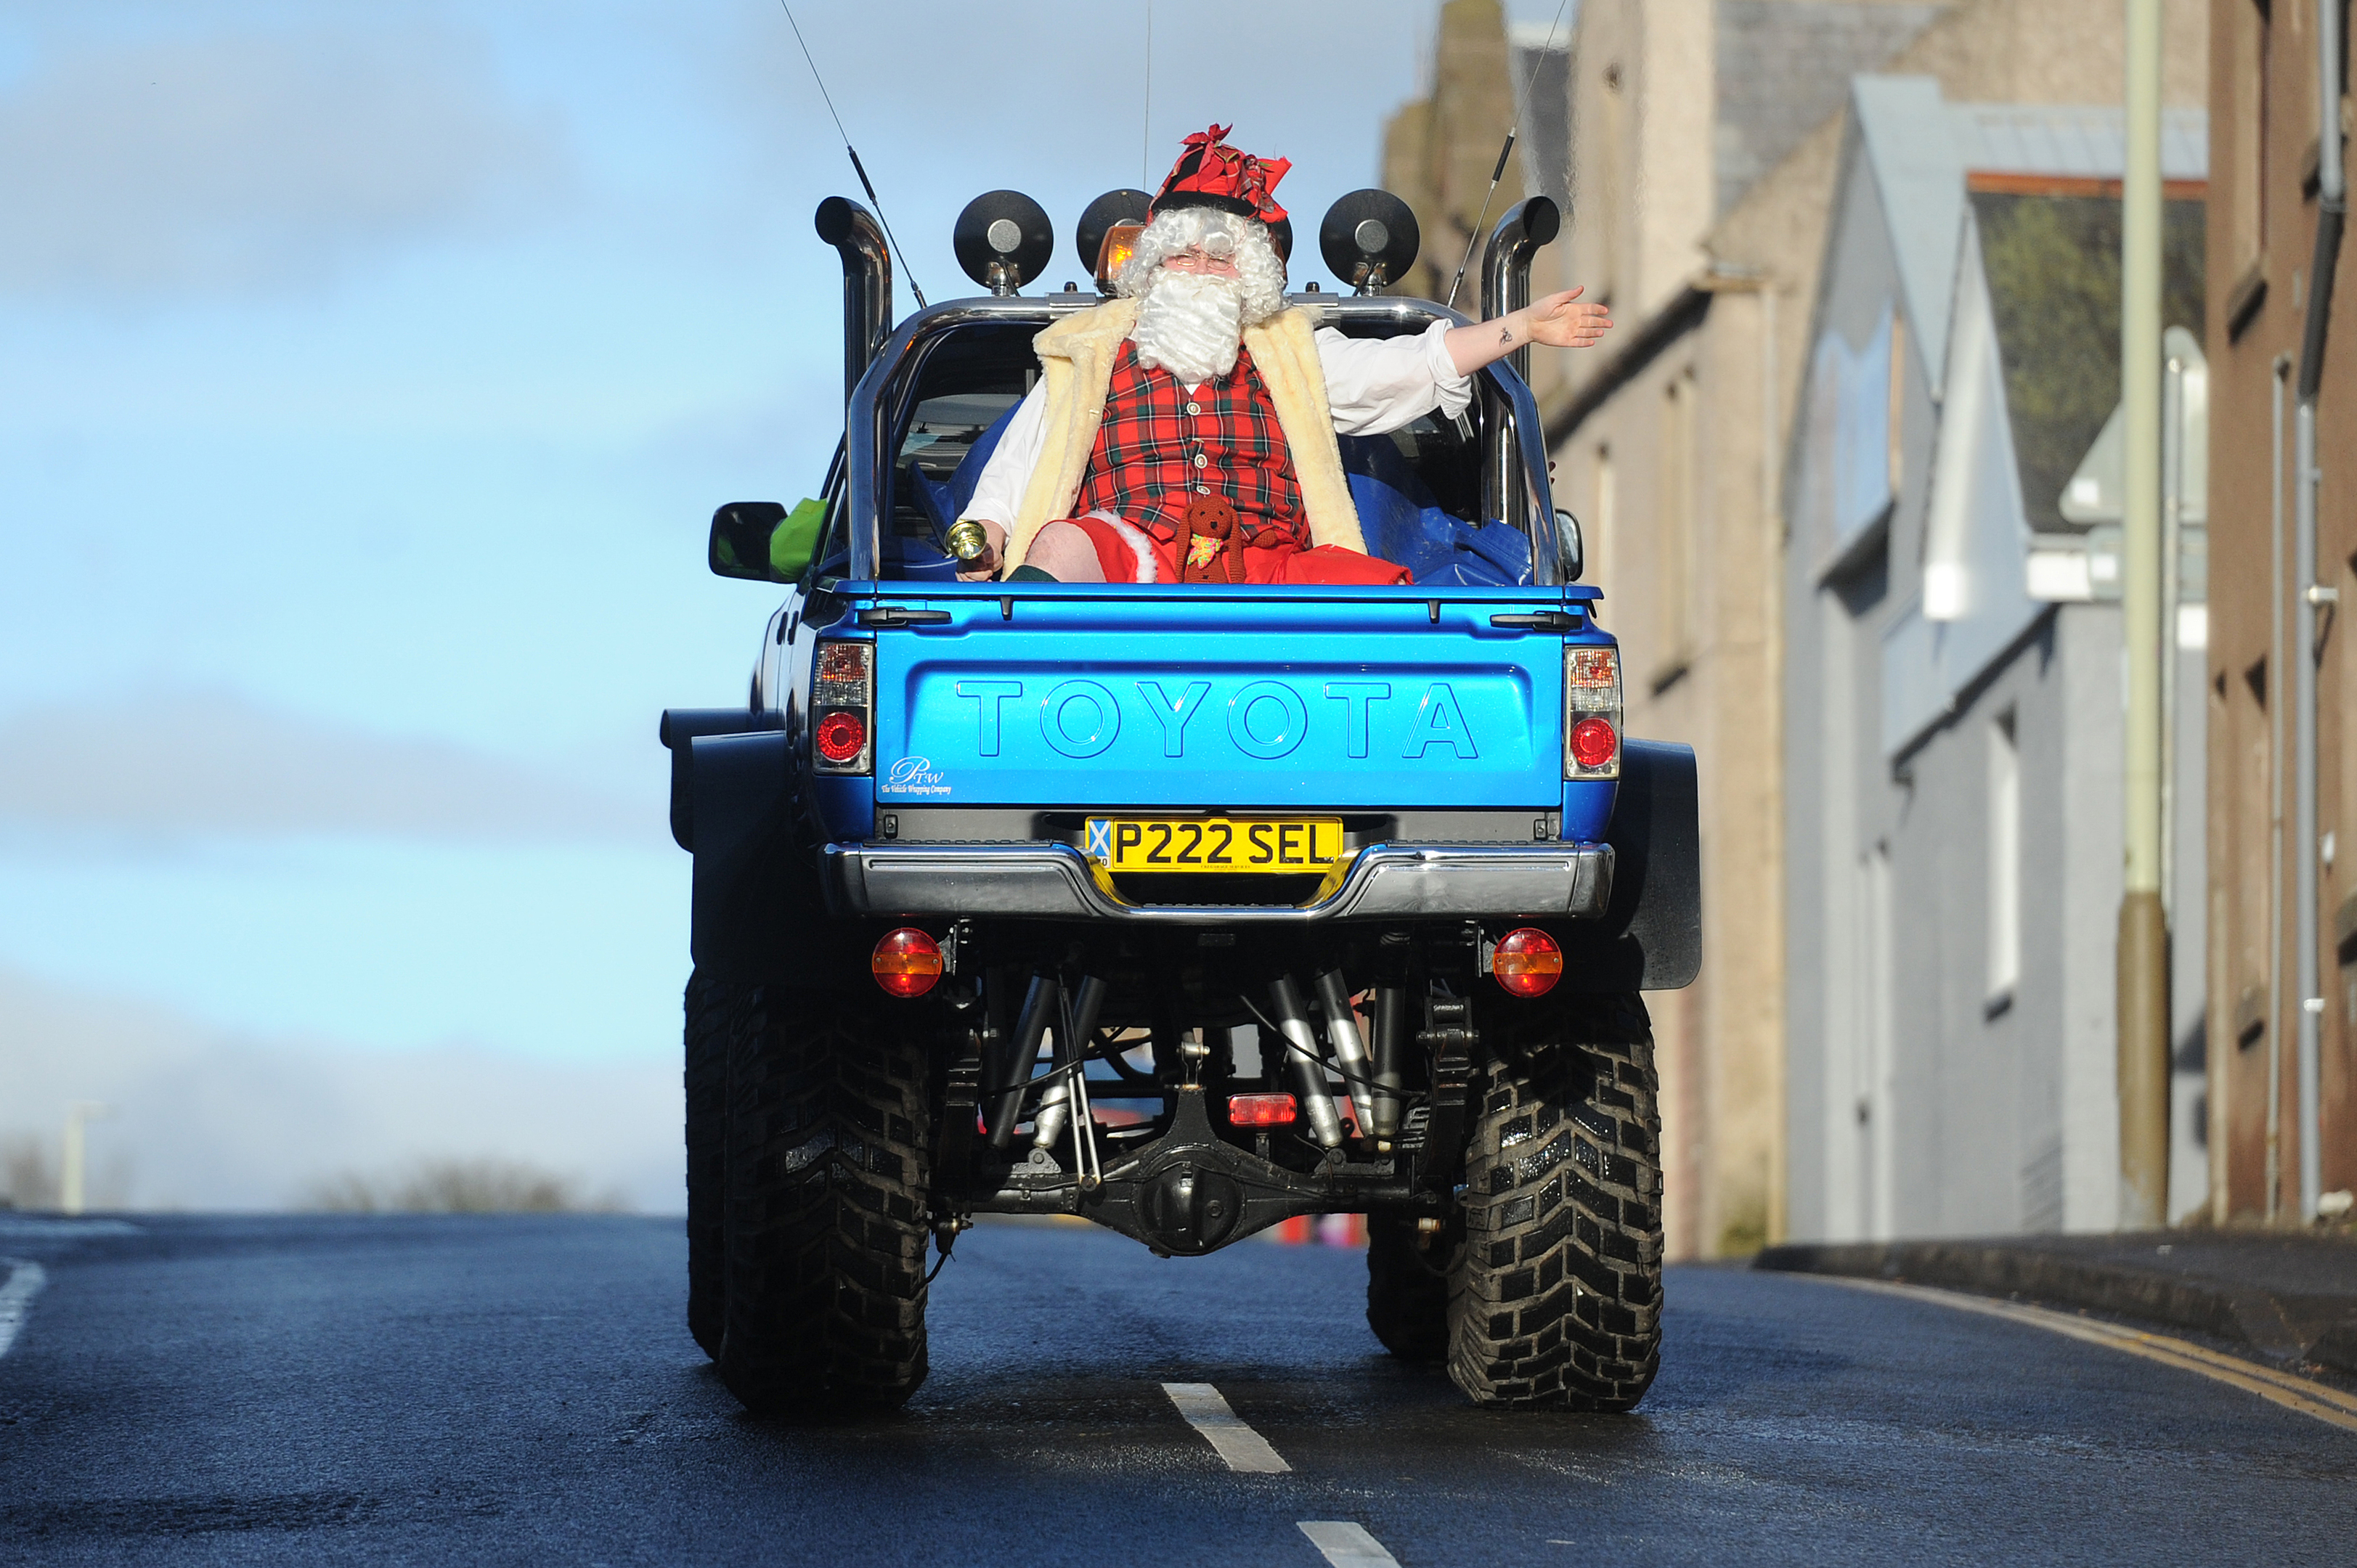 Santa arrived in style at the 2016 Brechin event